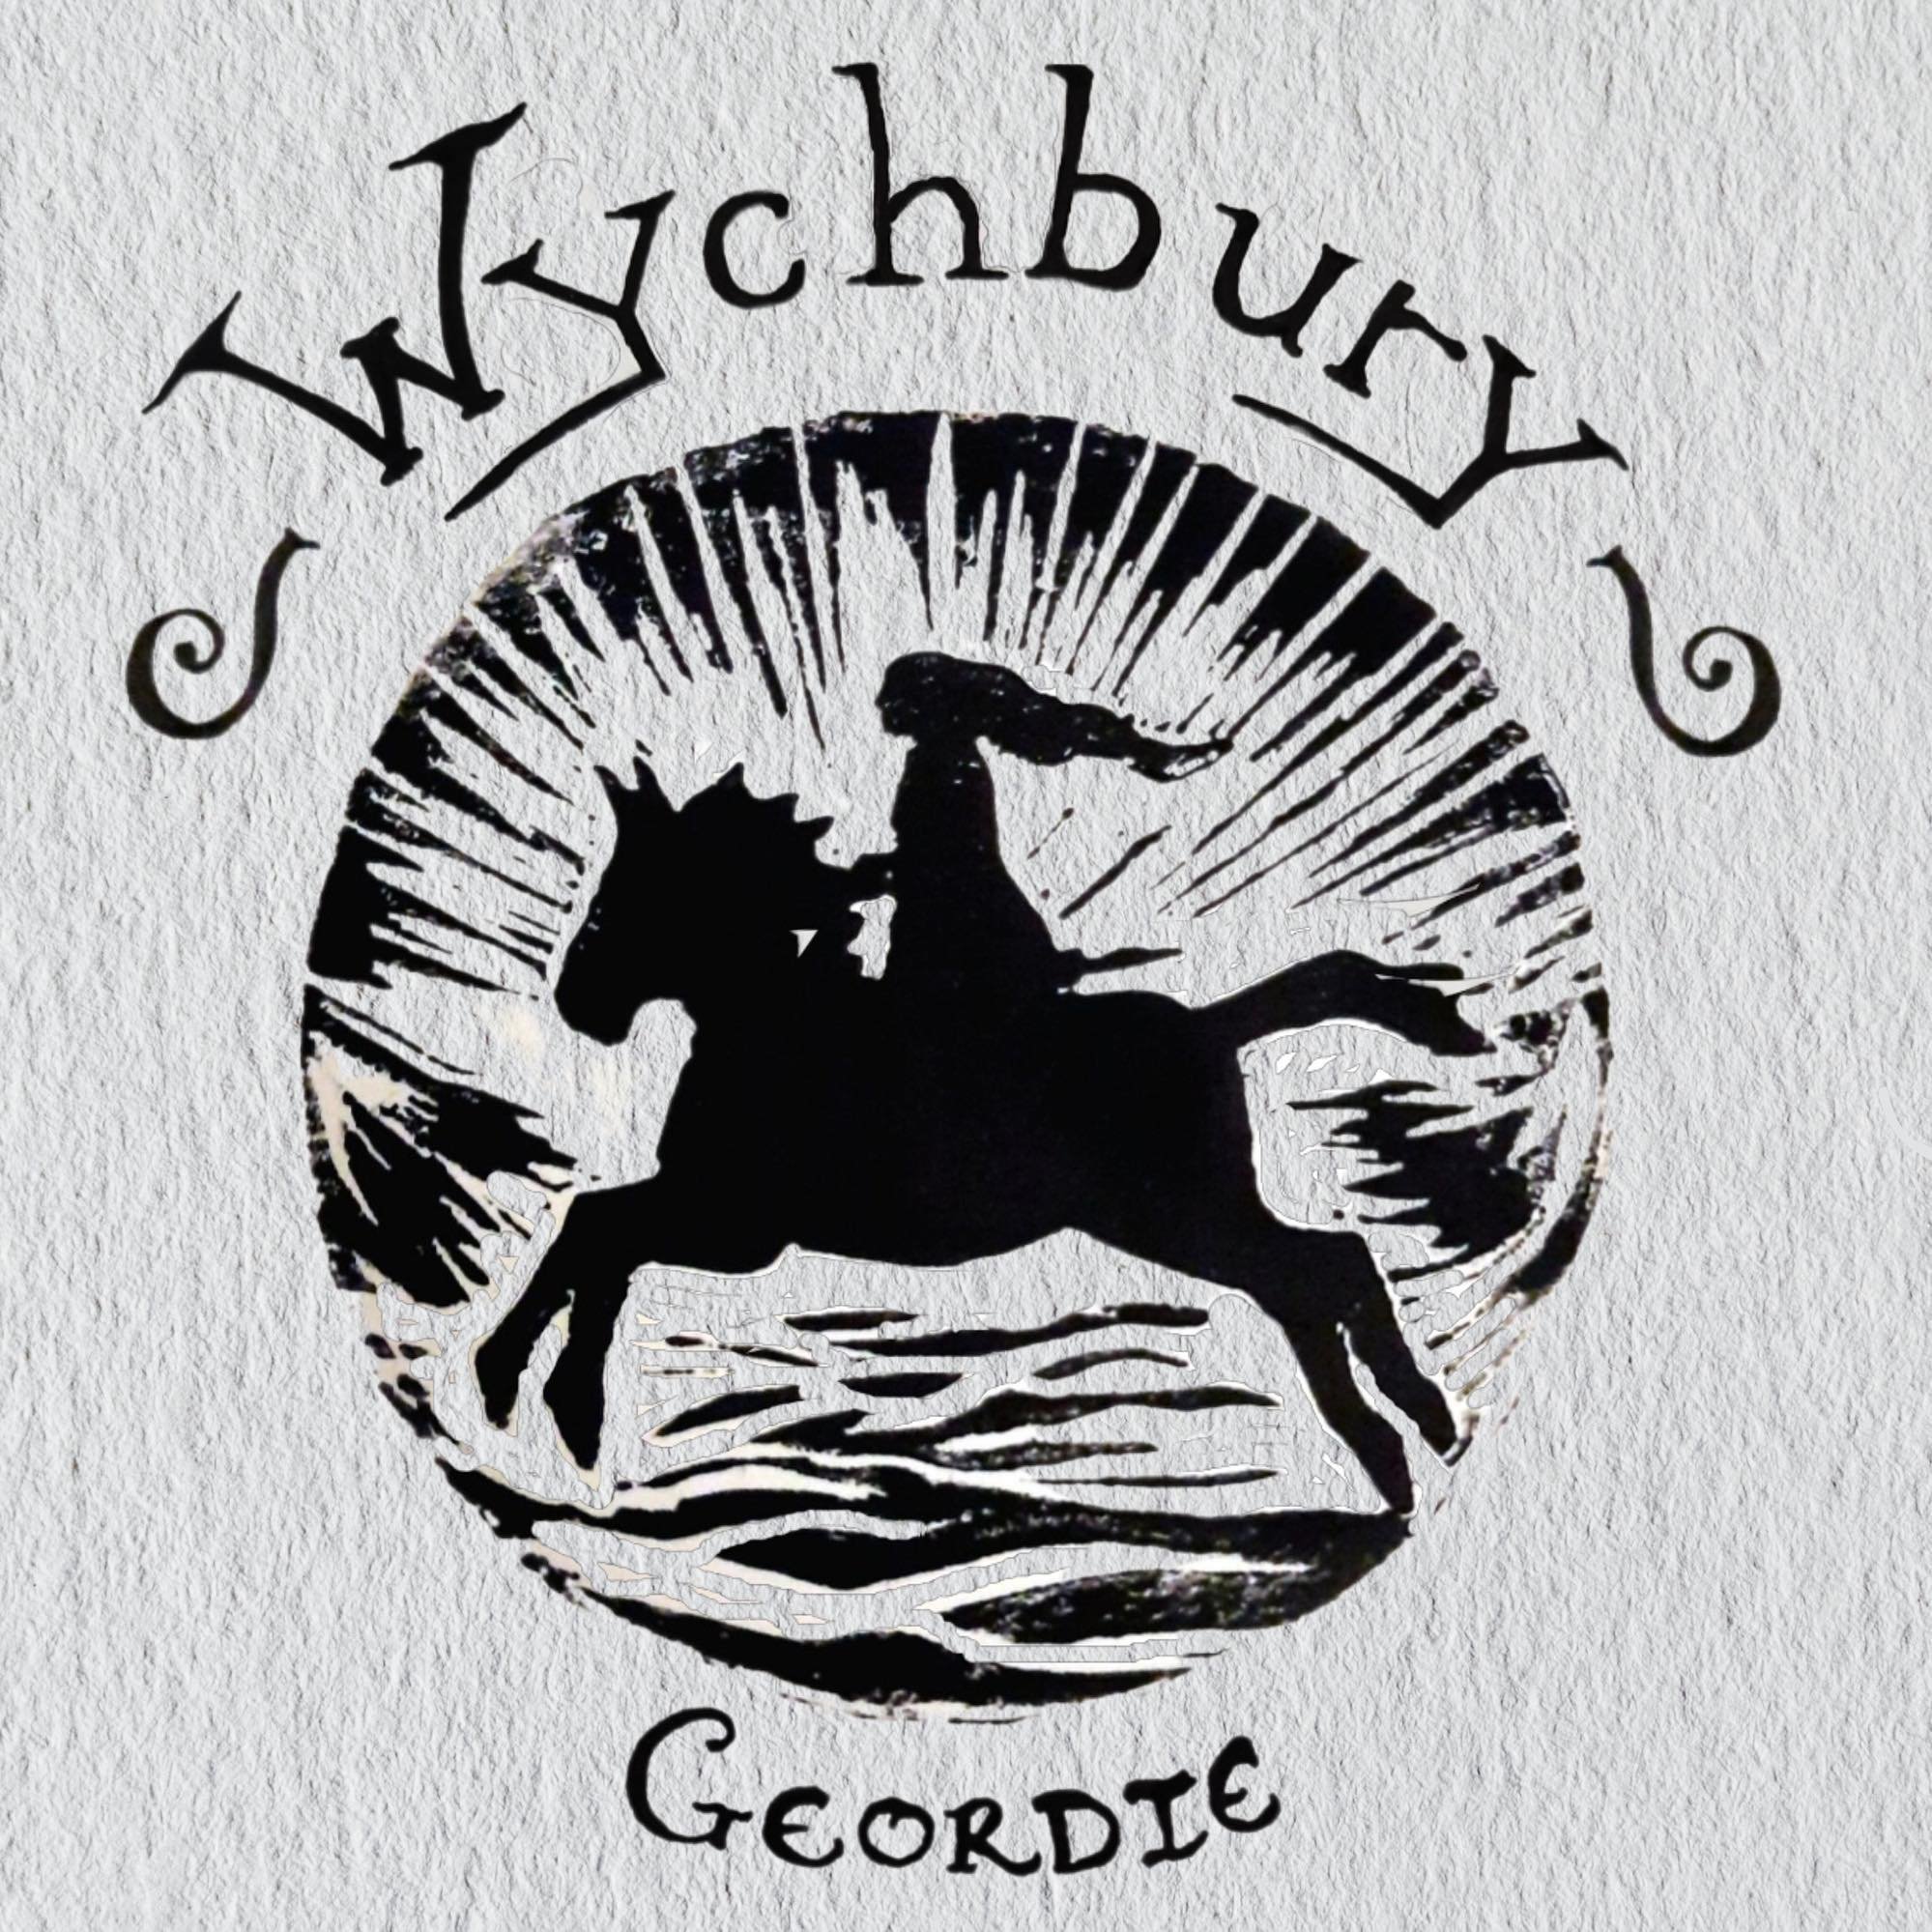 Wychbury - Geordie. Released Friday 5th April 2024. 

Wychbury, originally from the Midlands and currently bassed in Leeds, are a contemporary folk act that perform traditional and self-penned folk songs, steeped in epic, tragic and passionate storyt